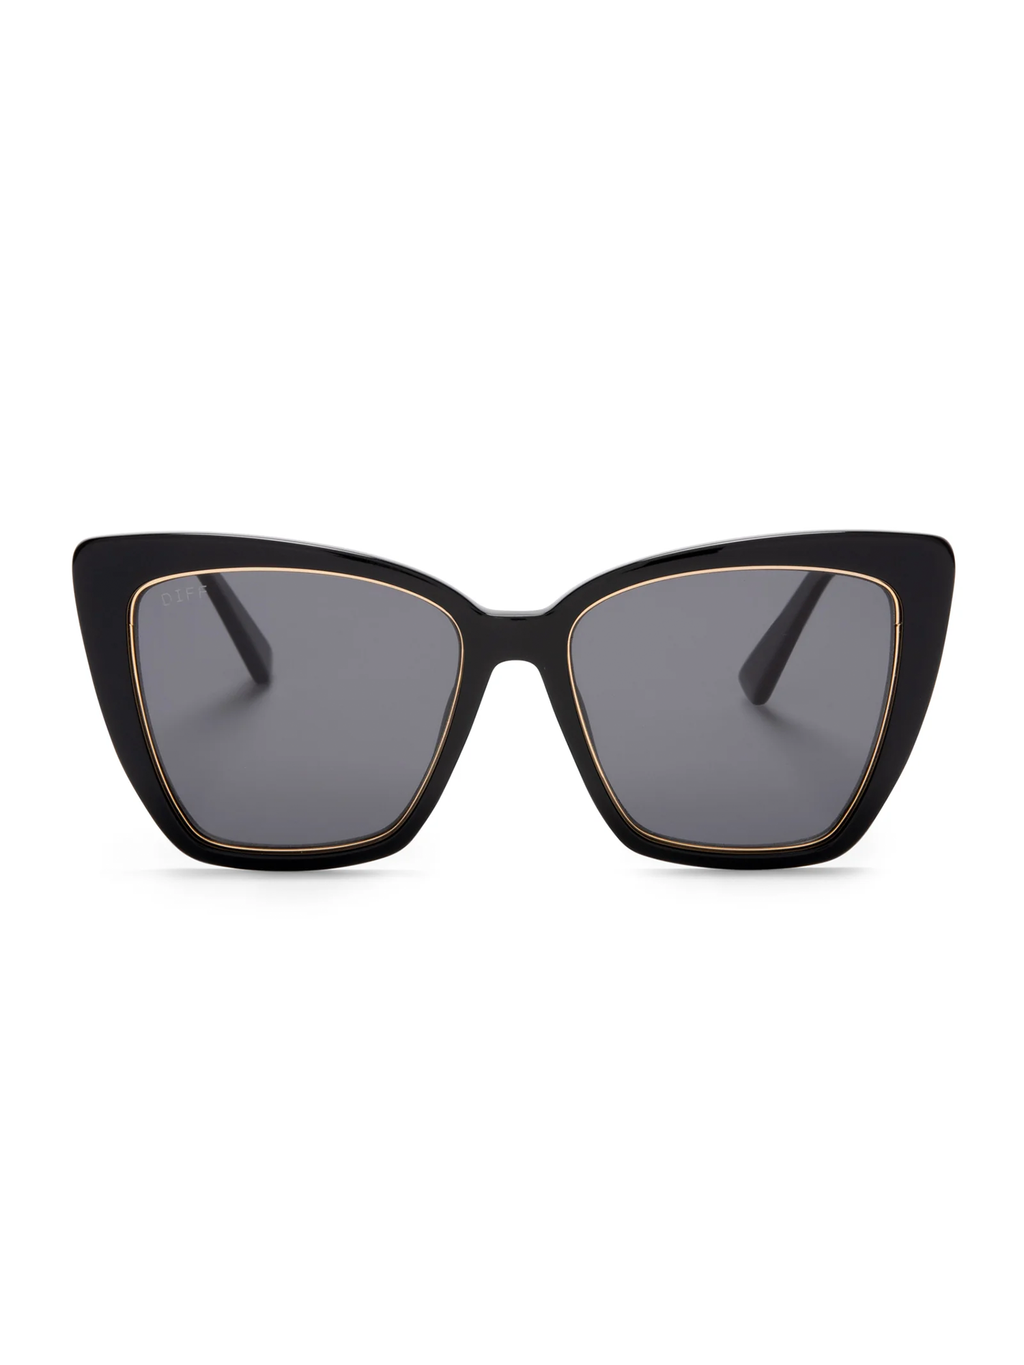 Becky IV Sunnies in Black Grey Polarized - Stitch And Feather